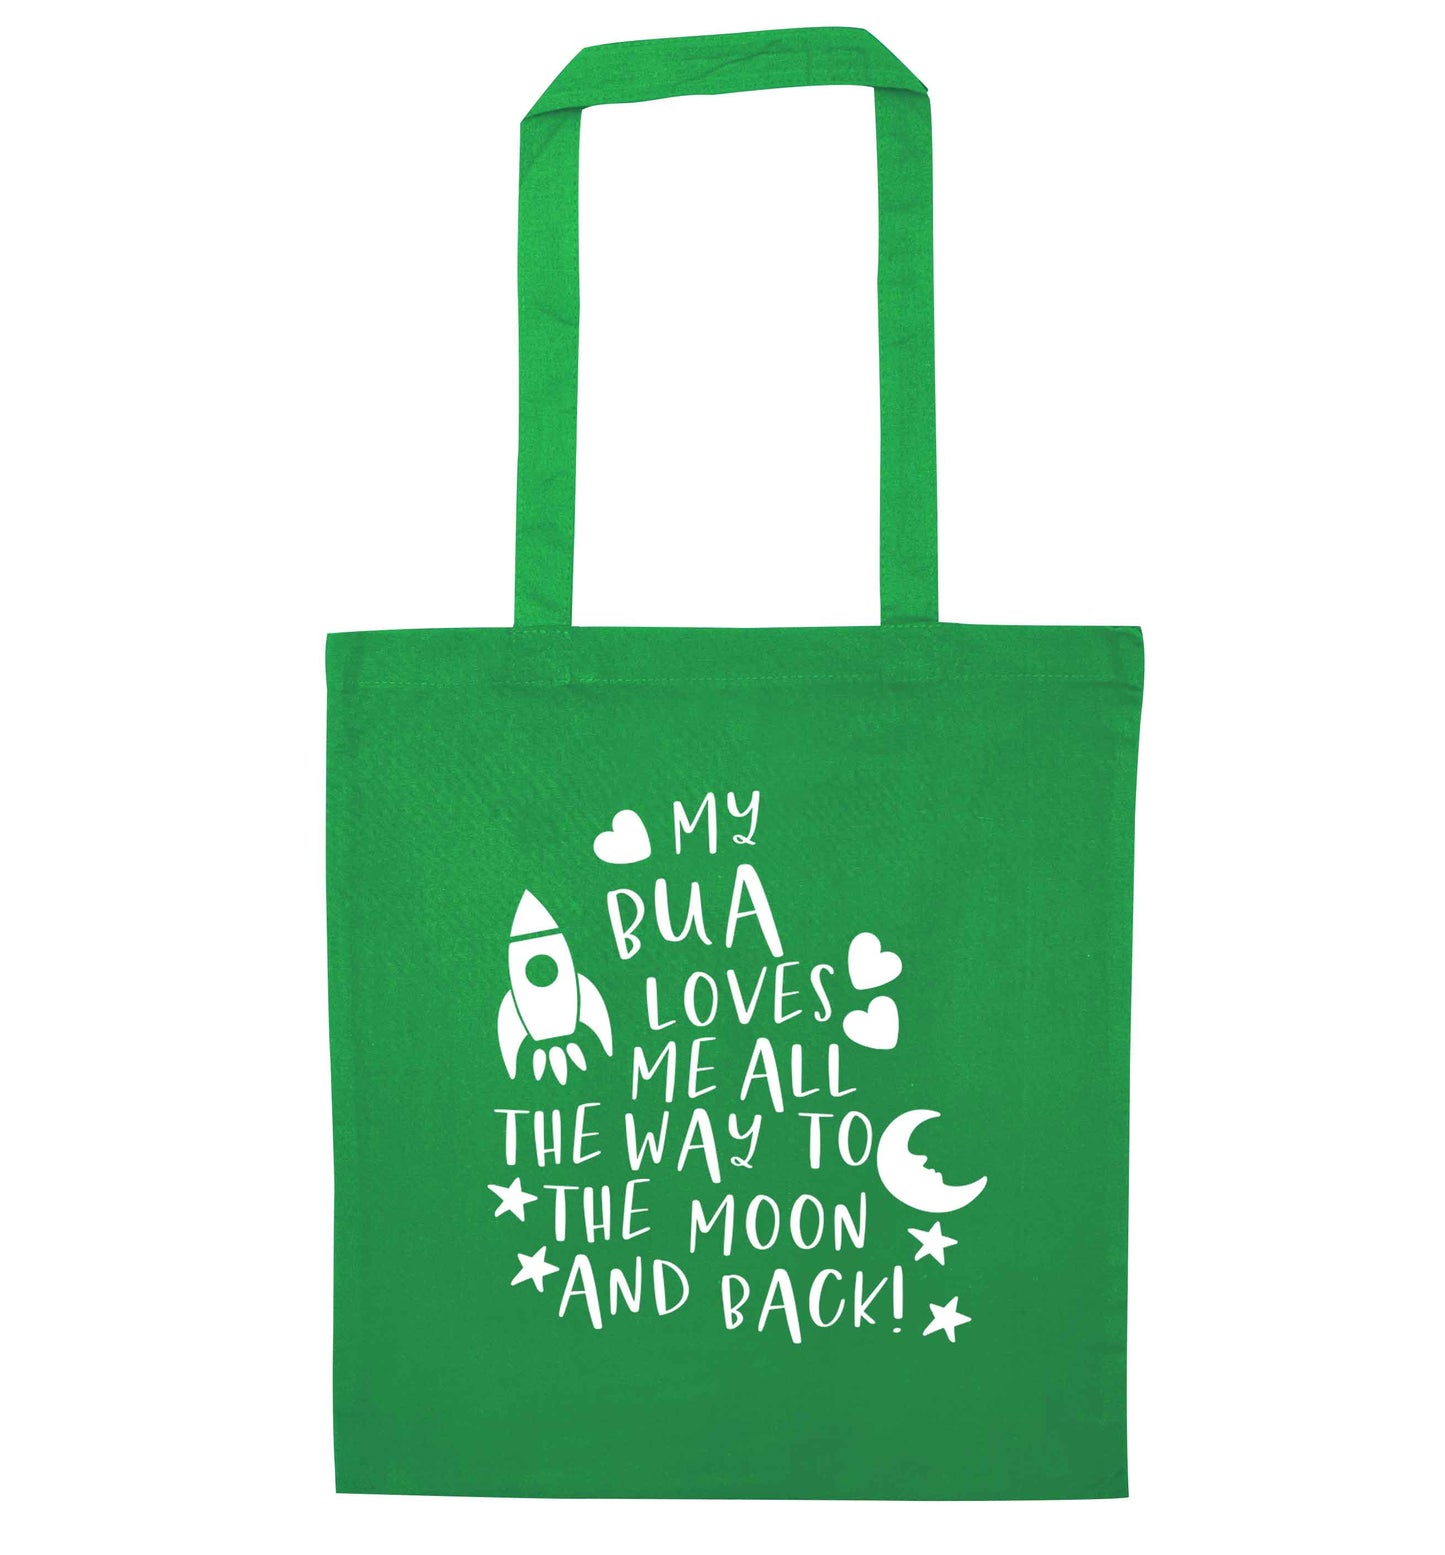 My bua loves me all they way to the moon and back green tote bag